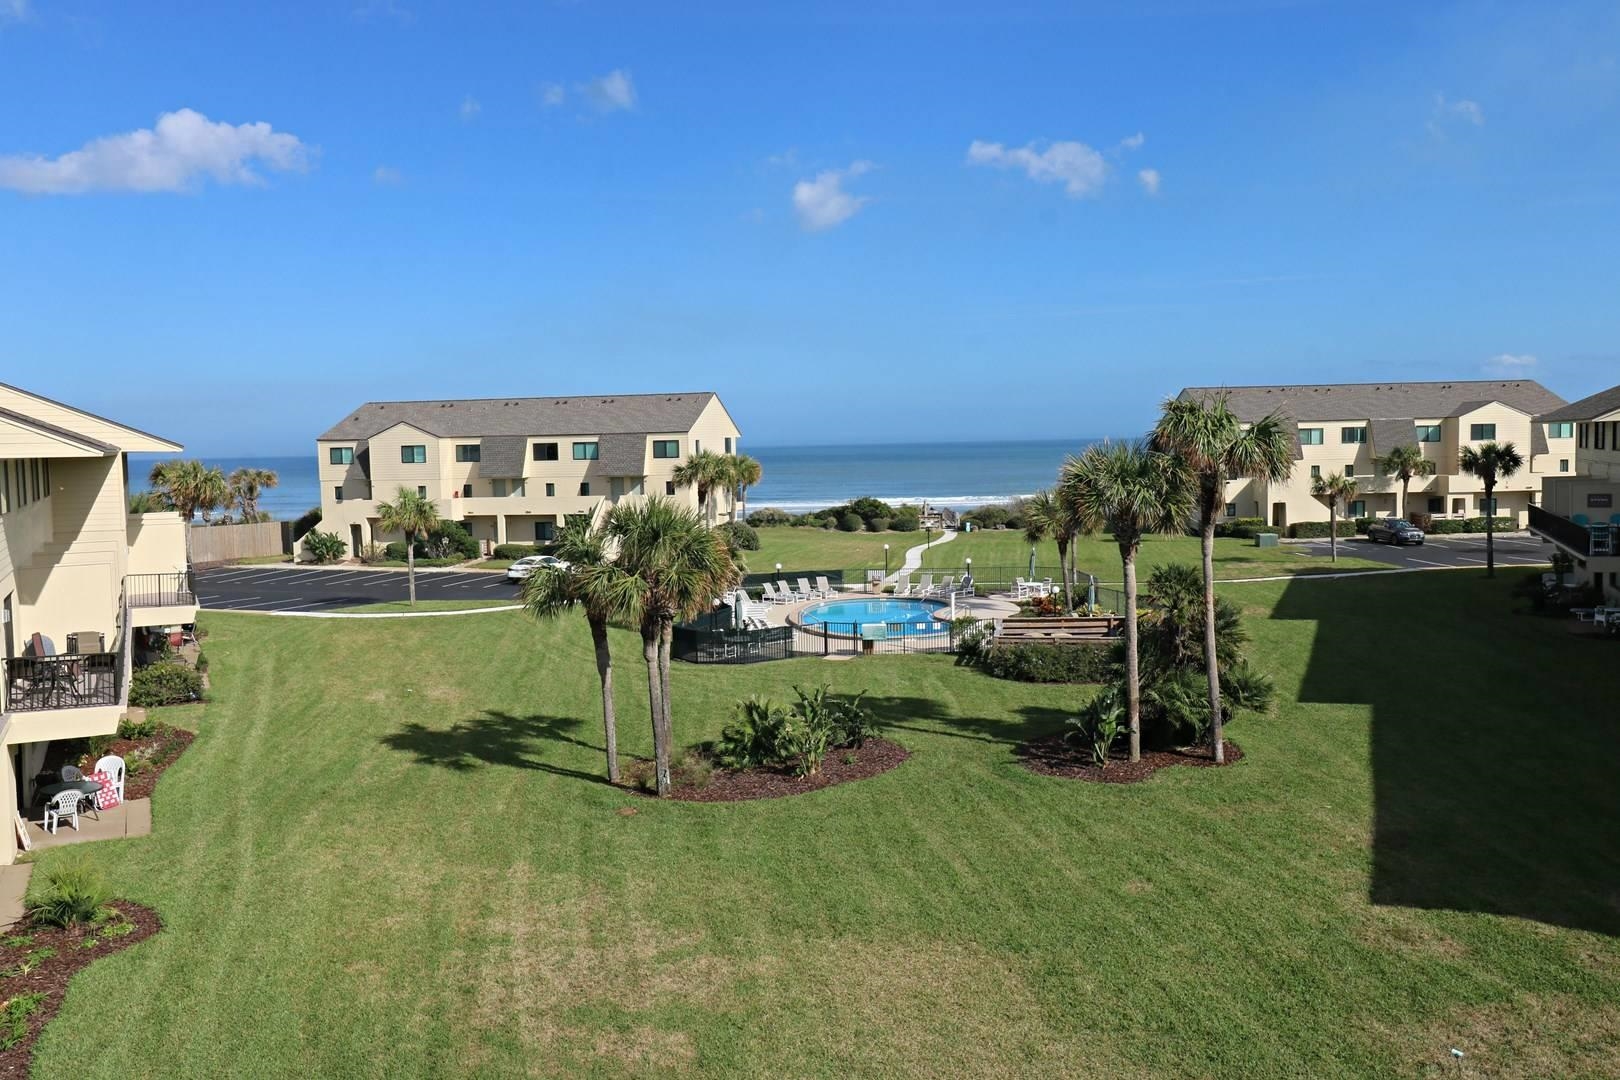 Love at first sight with this 2BR/2.5BA OCEAN VIEW condo.  When you walk through the front door you’ll immediately be drawn to the pool/ocean views, while your bedrooms provide stunning views of both the ocean and intracoastal waterway. Remodeled to perfection from top to bottom – leaving nothing to update! Top notch finishes include –cabinets, countertops, furniture & appliances.  Upgraded hardwood floors throughout with carpeting in the bedrooms.  Unit is presently on short term rental program.